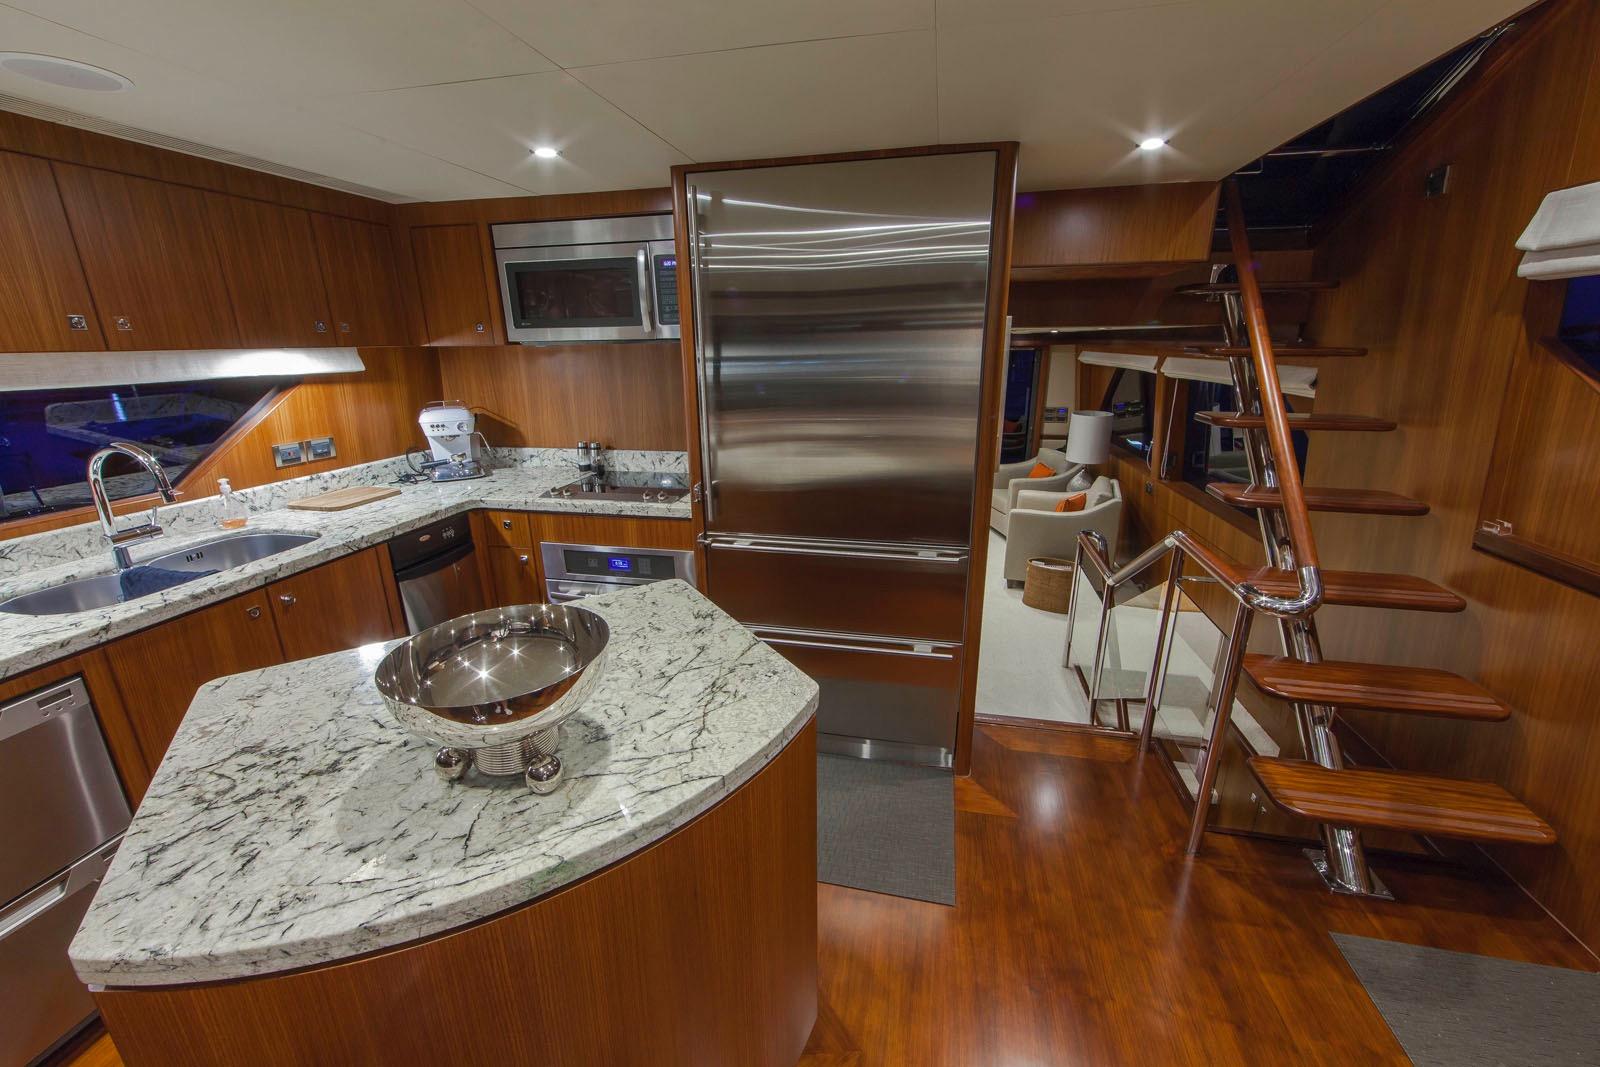 Galley